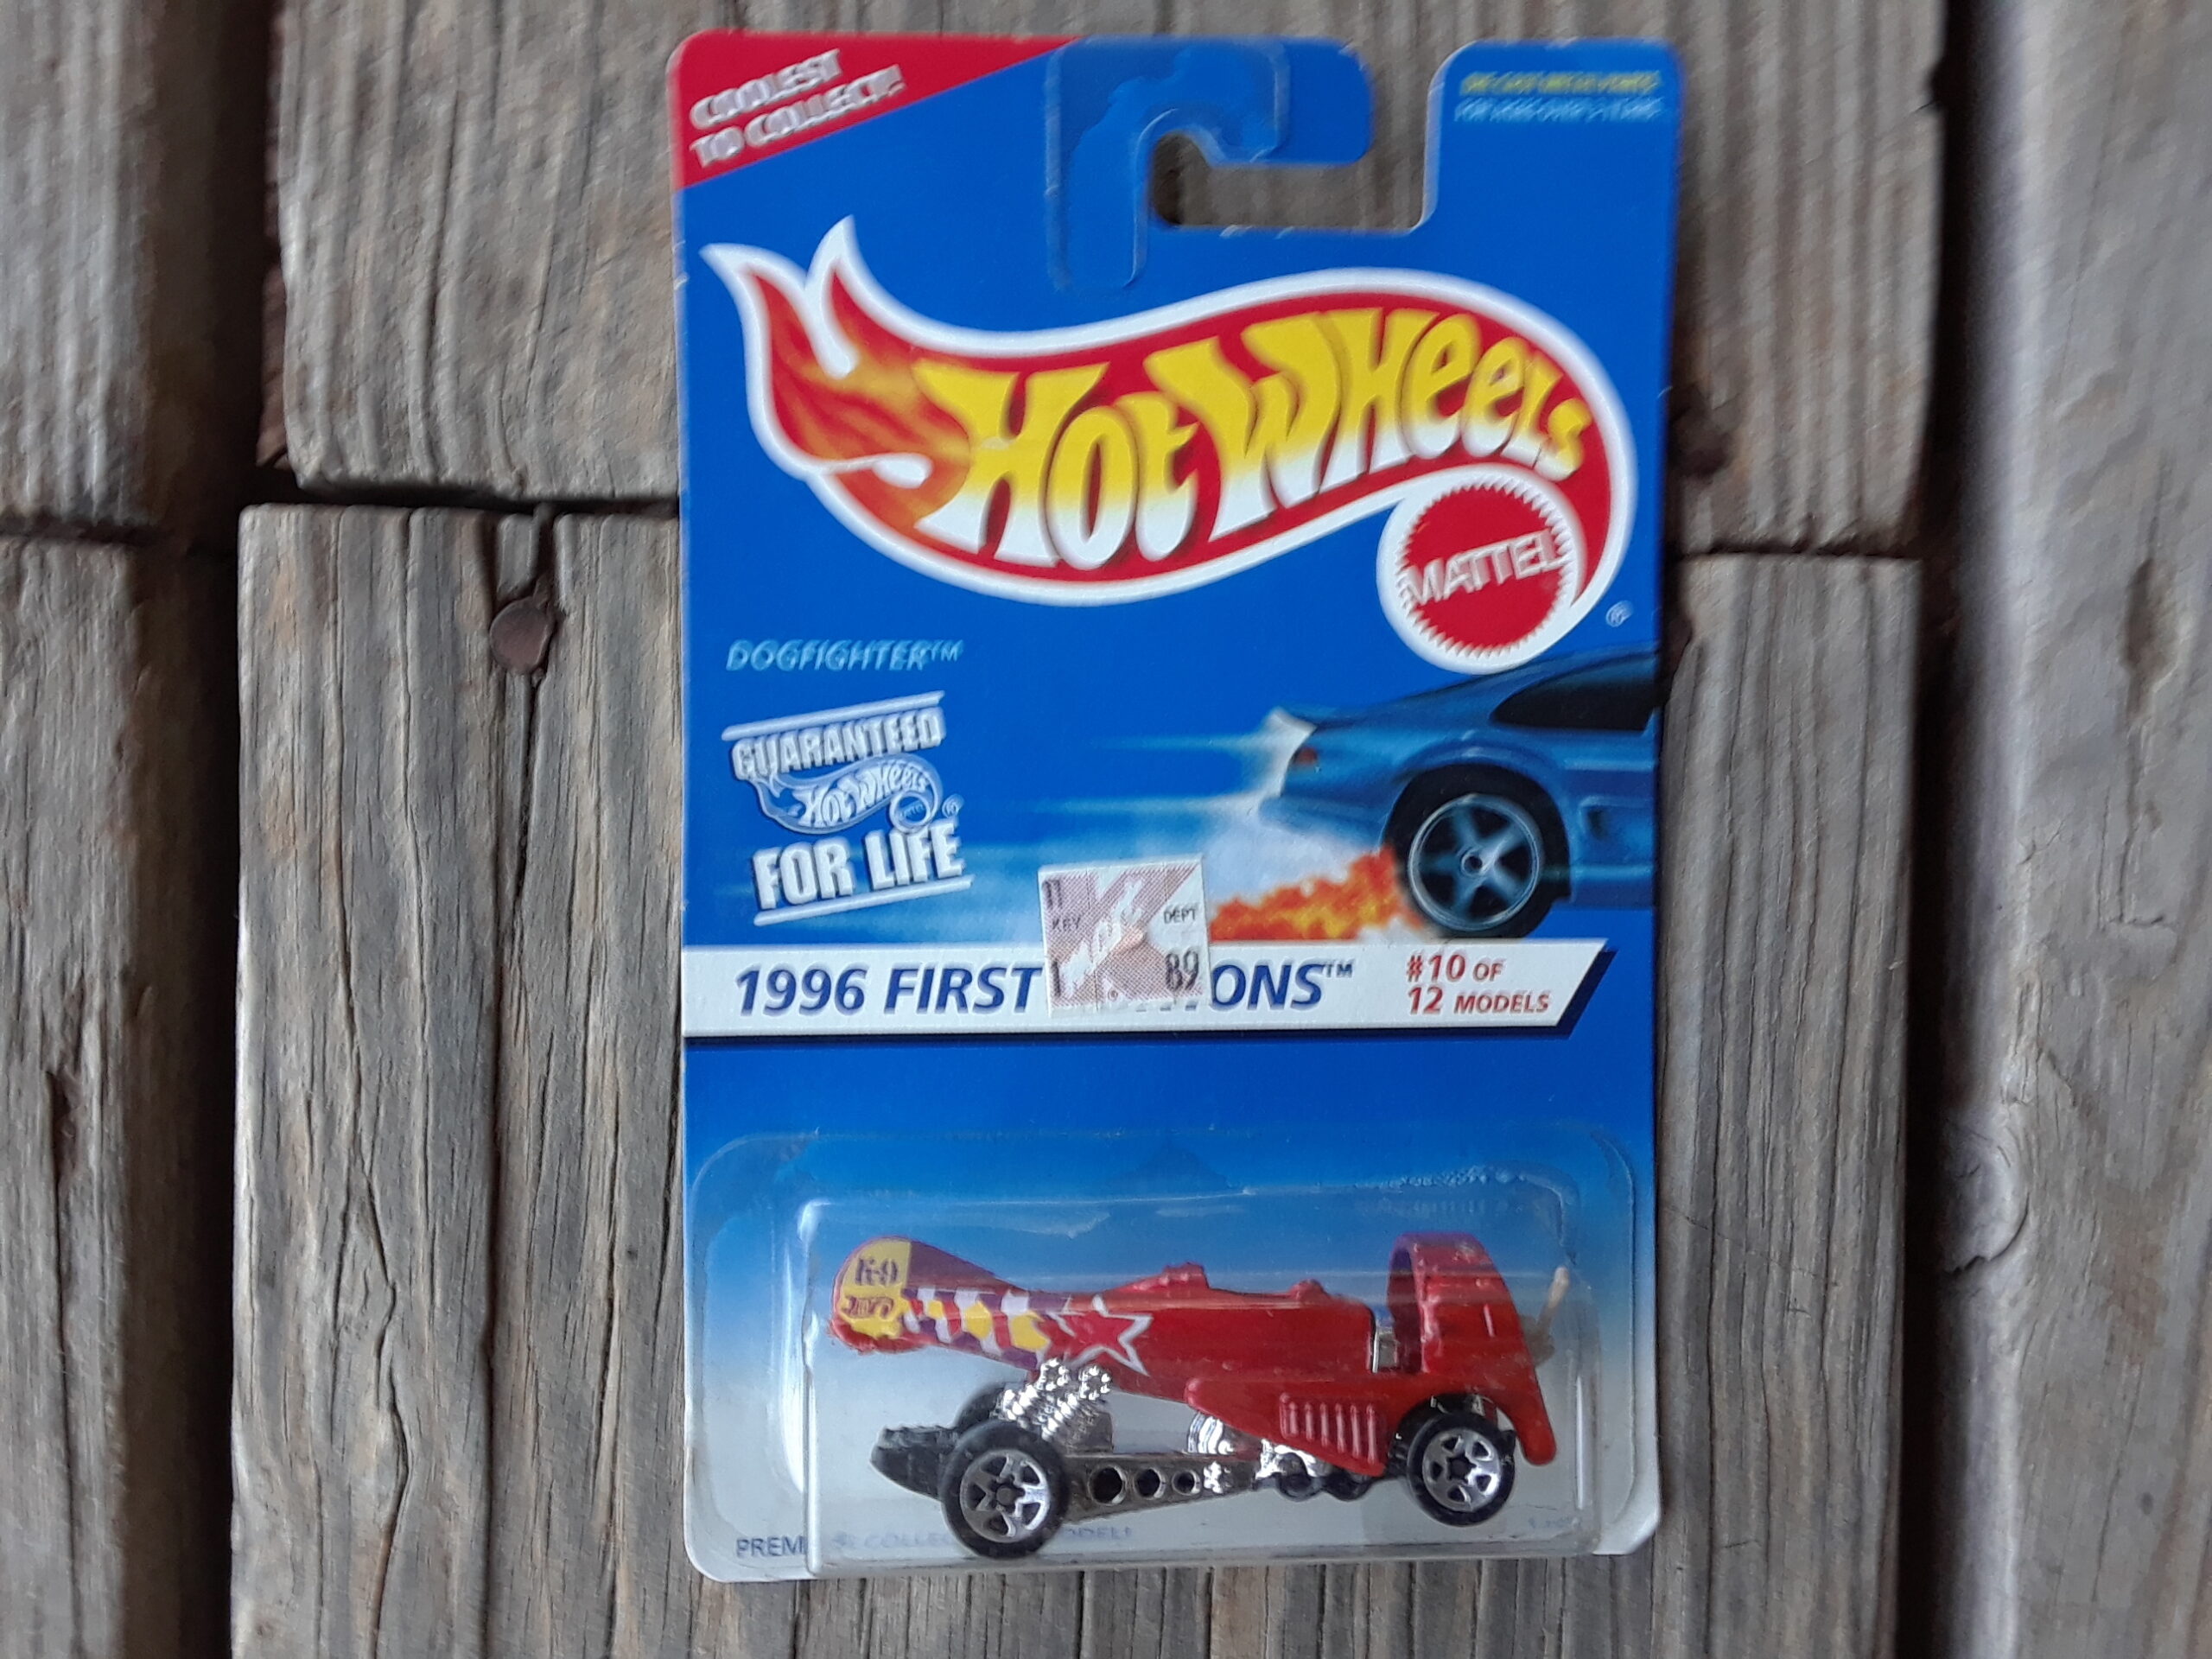 Hot Wheels 1996 First Editions Dogfighter